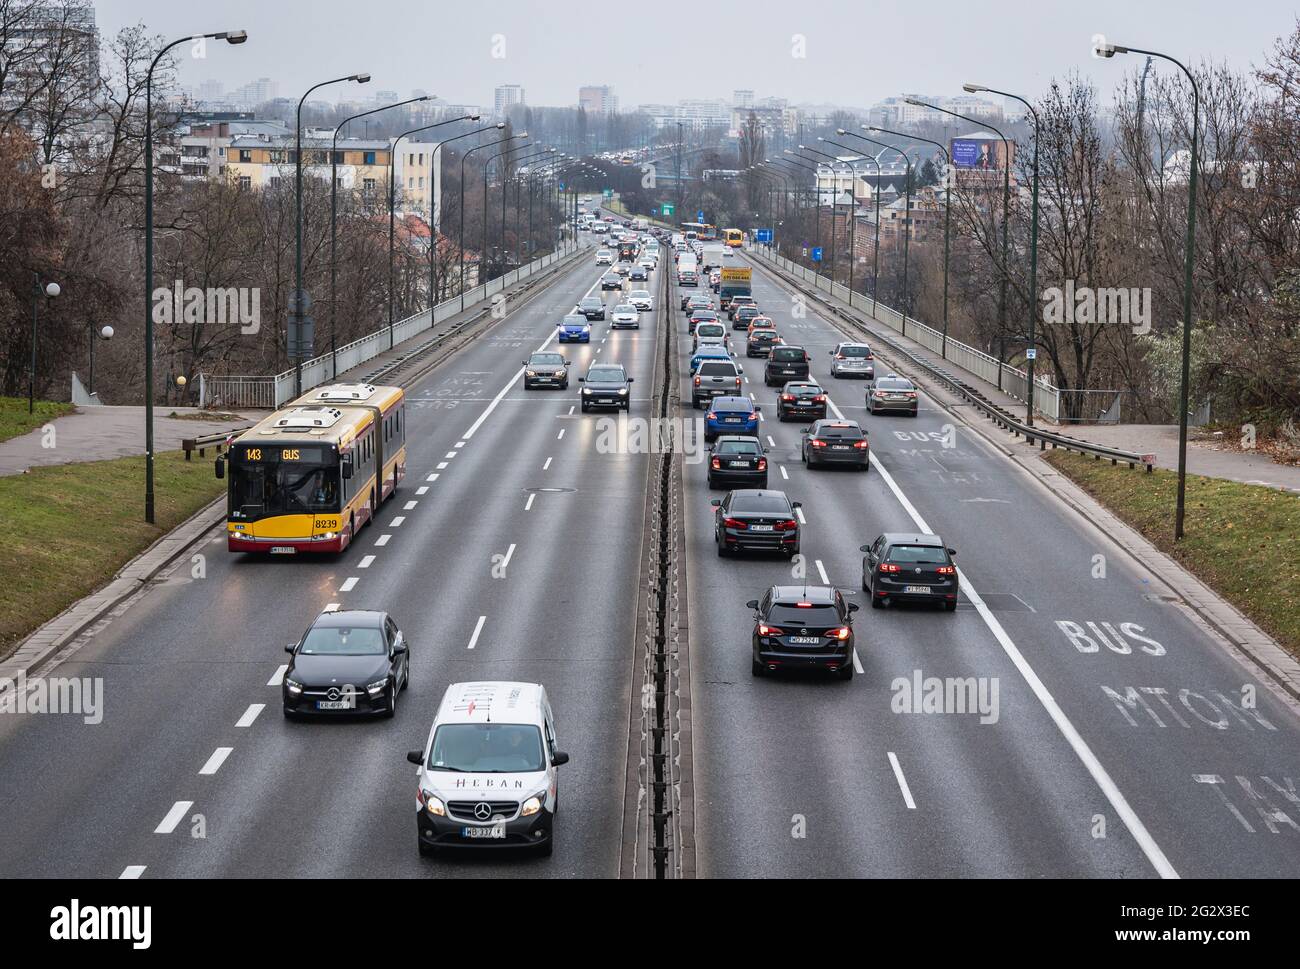 Cars seen from pedestrian crossing over Lazienkowska Street in Warsaw, capital of Poland Stock Photo